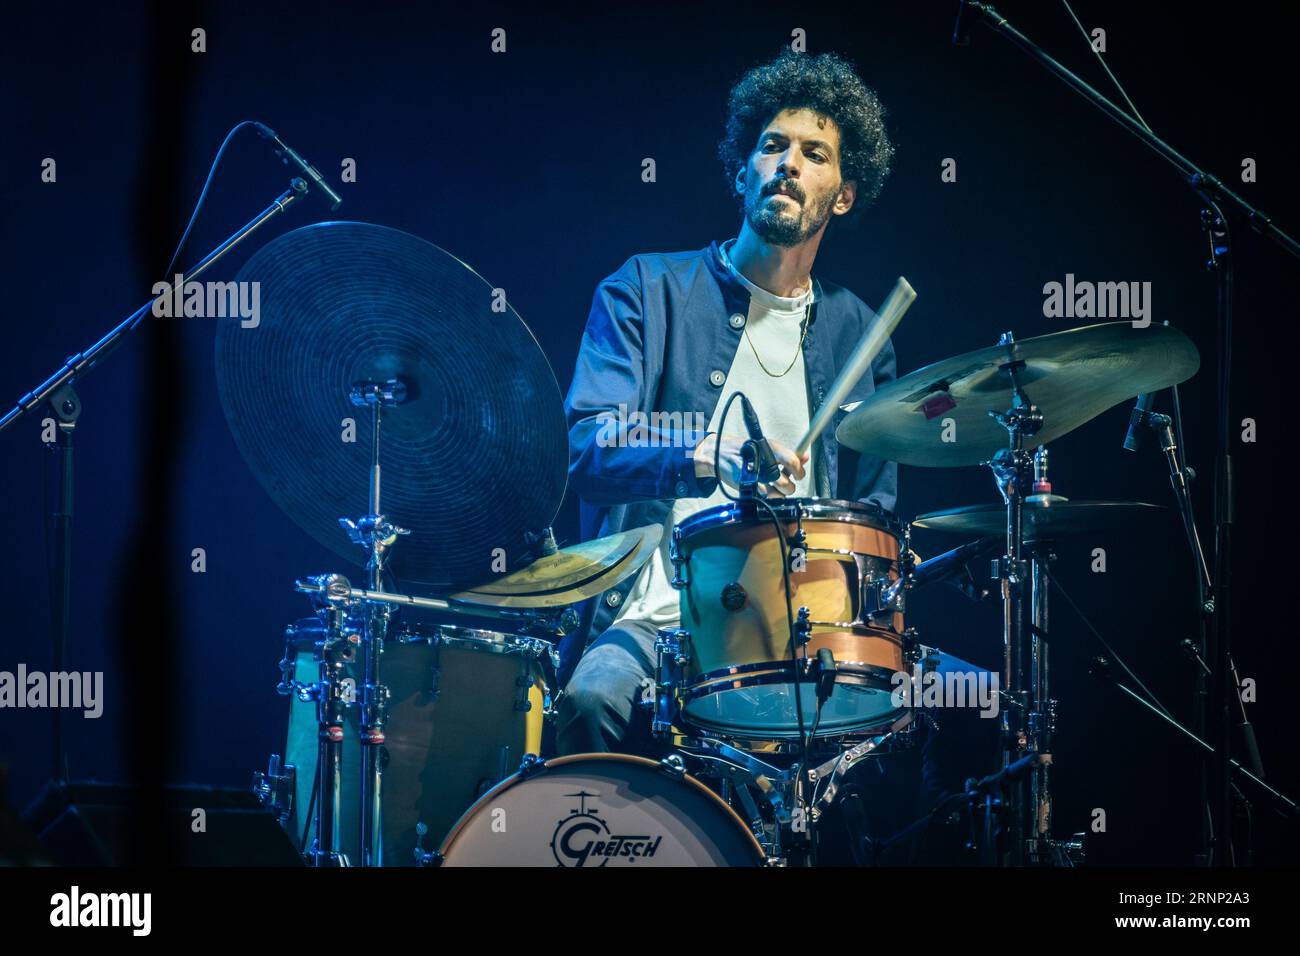 Drummer Matan Assayag performs during the concert of the Israeli jazz group Shalosh at the Husa na Provazku Theatre as part of the Jewish culture fest Stock Photo